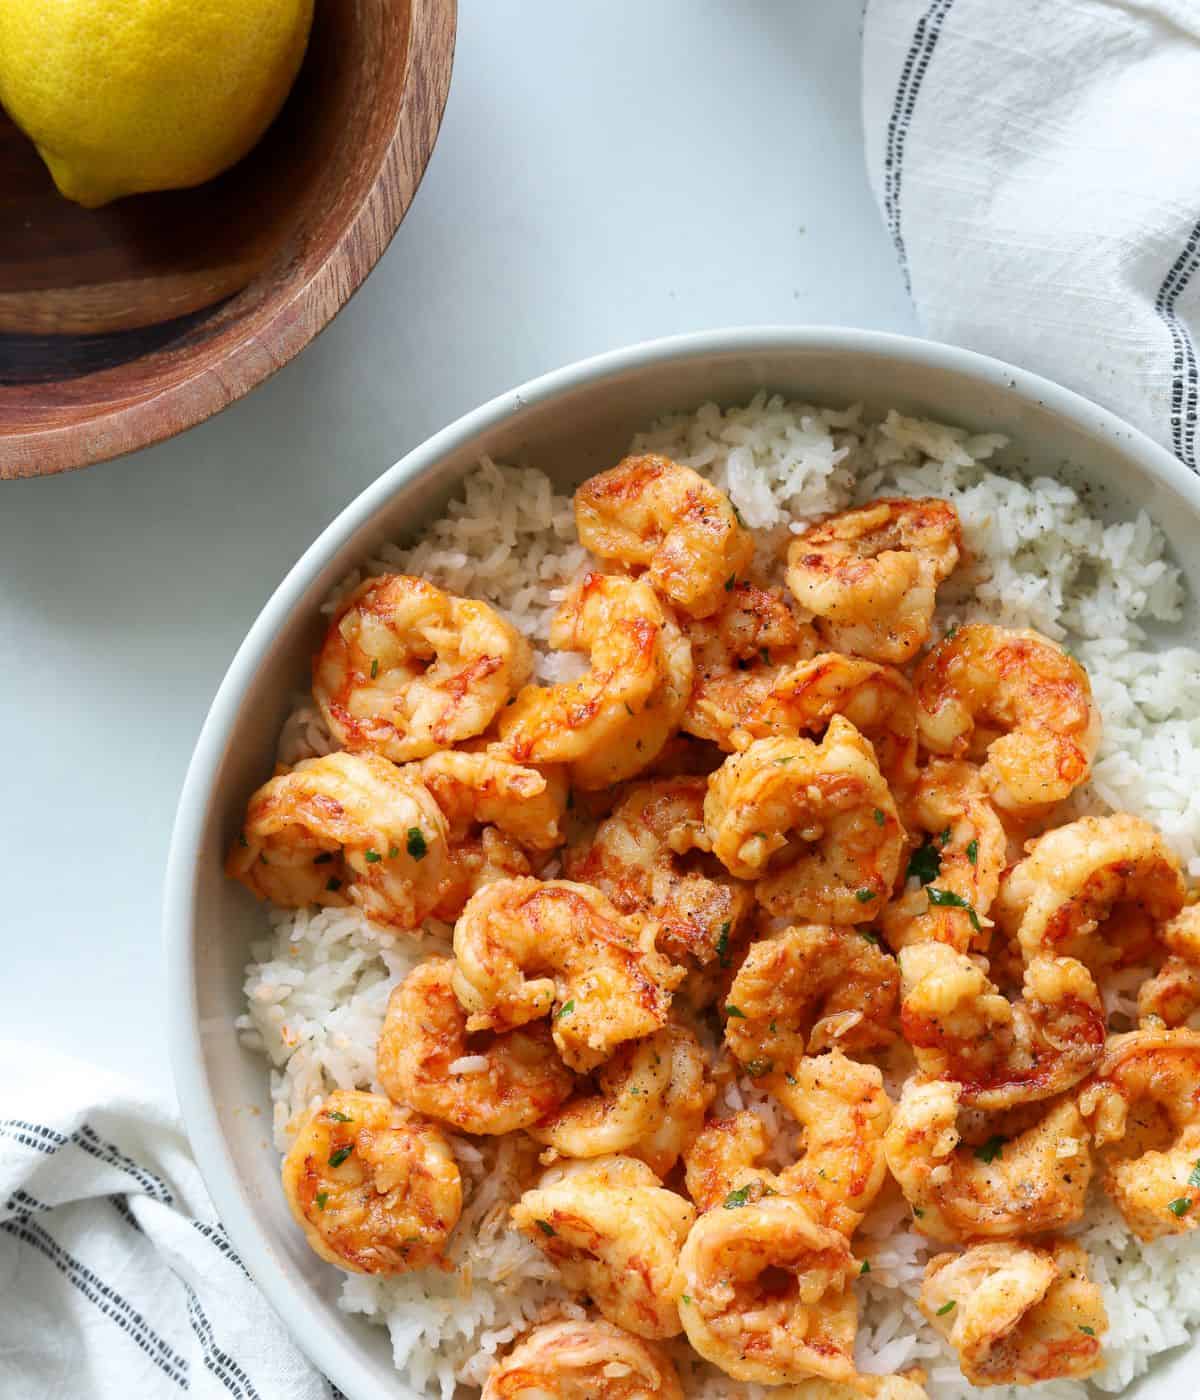 overhead view of shrimp in large bowl over rice with lemons in a bowl on side